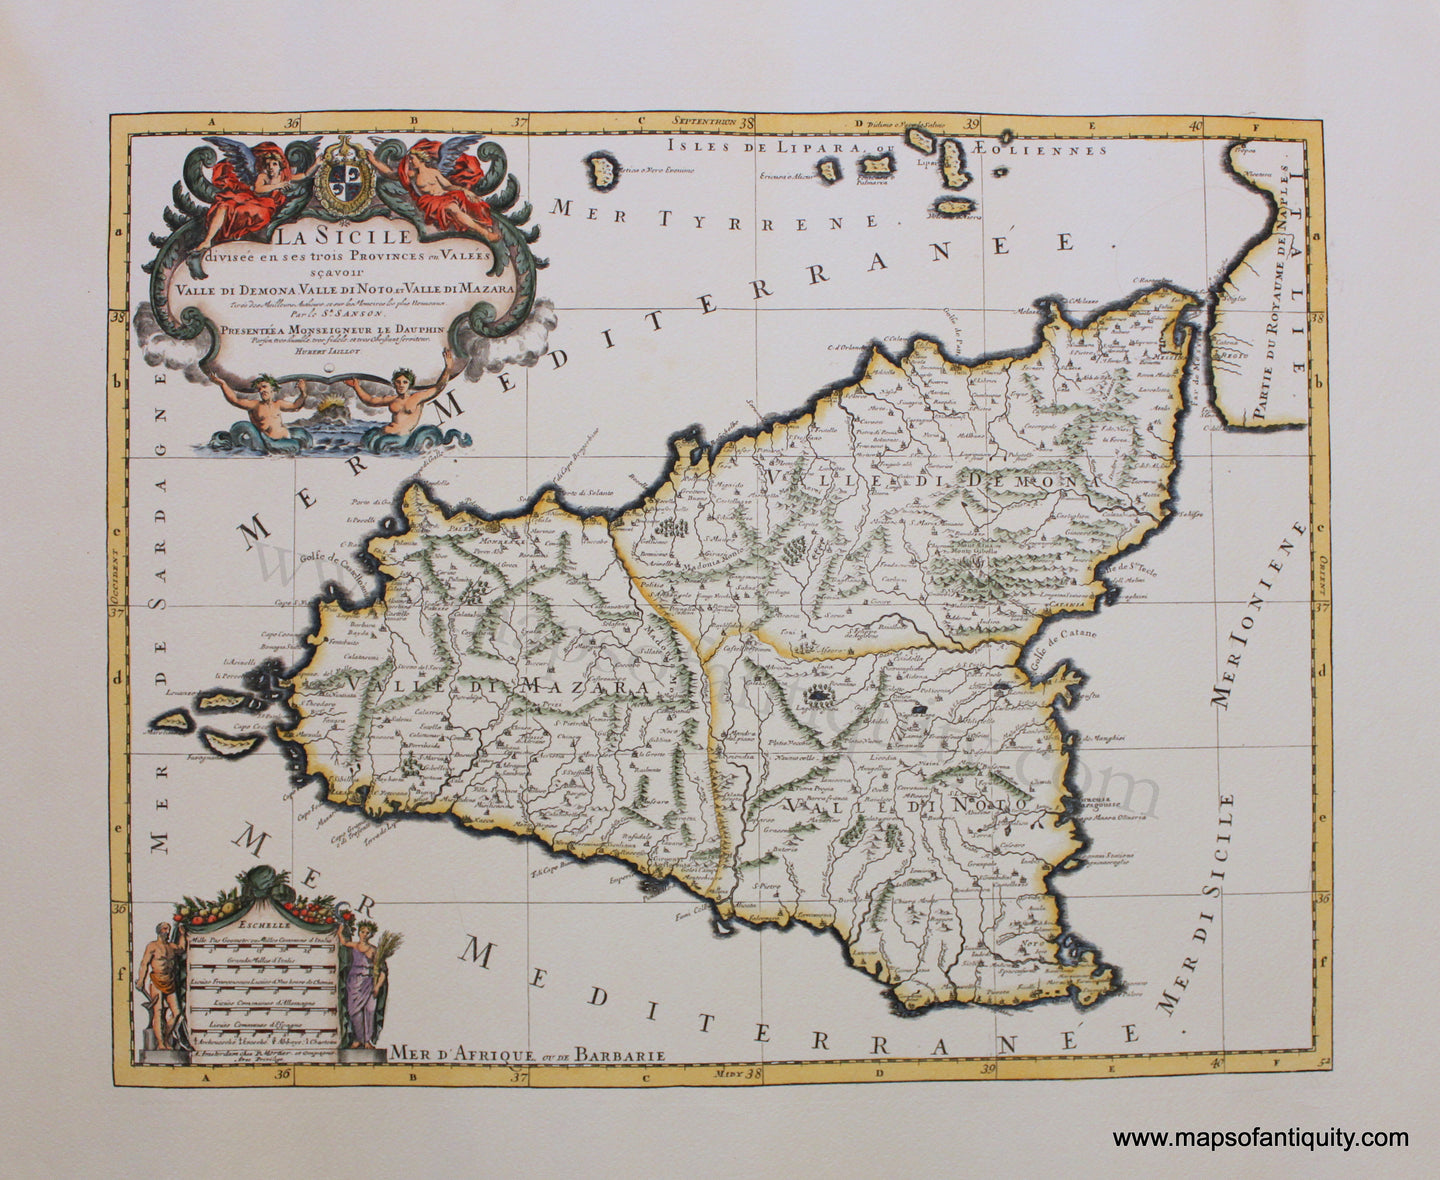 Digitally-Engraved-Specialty-Reproduction-La-Sicile-Sicily-Italy-Reproduction-Maps-Of-Antiquity